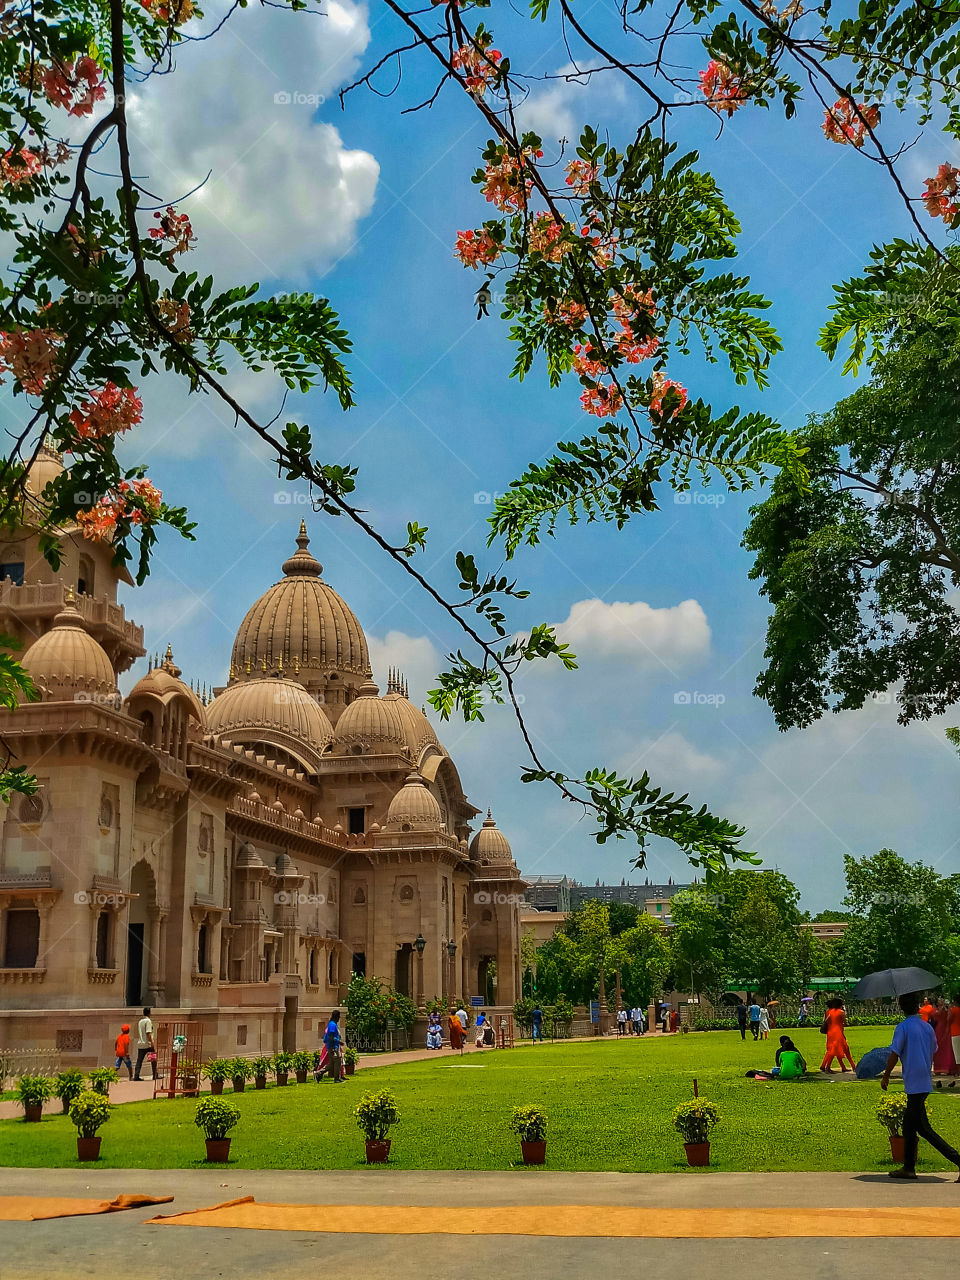 Beluṛ Maṭh is the headquarters of the Ramakrishna Math and Mission, founded by Swami Vivekananda,located on the west bank of Hooghly River notable for it's architecture that fuses Christian, Islamic, Hindu n Buddhist art motifs as symbol of unity.